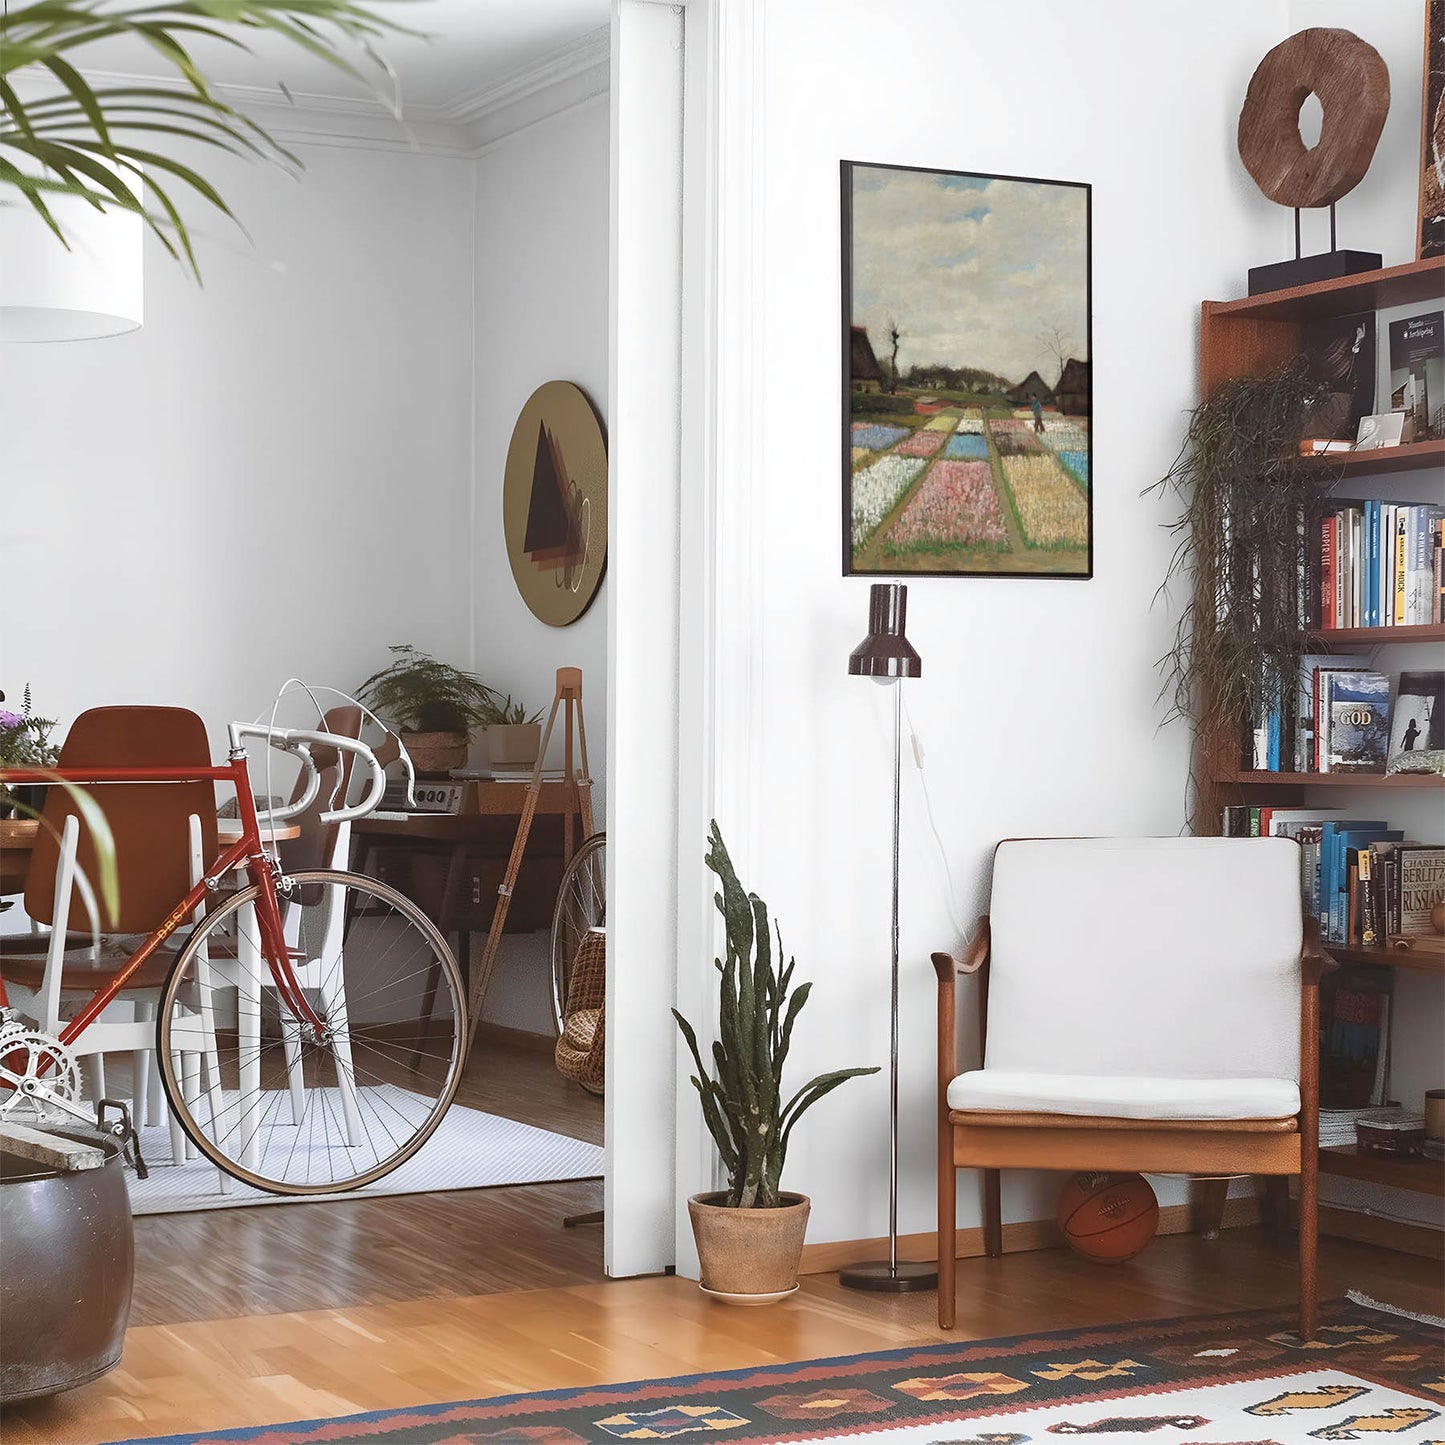 Eclectic living room with a road bike, bookshelf and house plants that features framed artwork of a Antique Field of Flowers above a chair and lamp